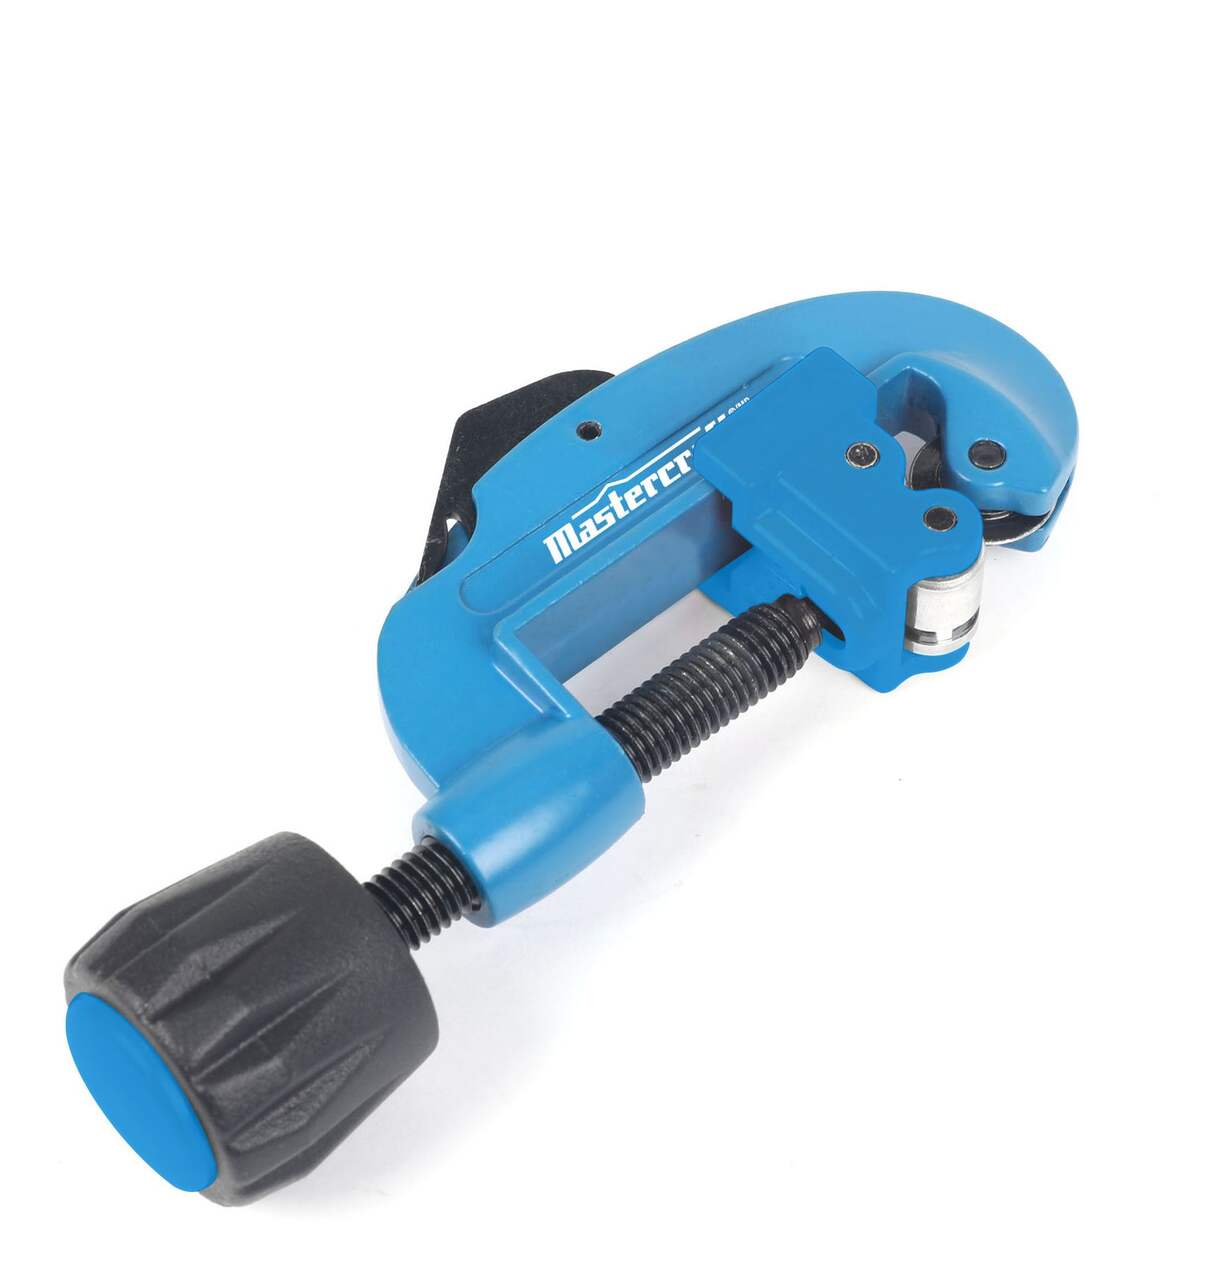 https://media-www.canadiantire.ca/product/fixing/plumbing/rough-plumbing/0638780/mastercraft-3-to-30mm-tube-cutter-44fa38b3-2e9c-4f39-bf49-acd3275edeb1-jpgrendition.jpg?imdensity=1&imwidth=1244&impolicy=mZoom